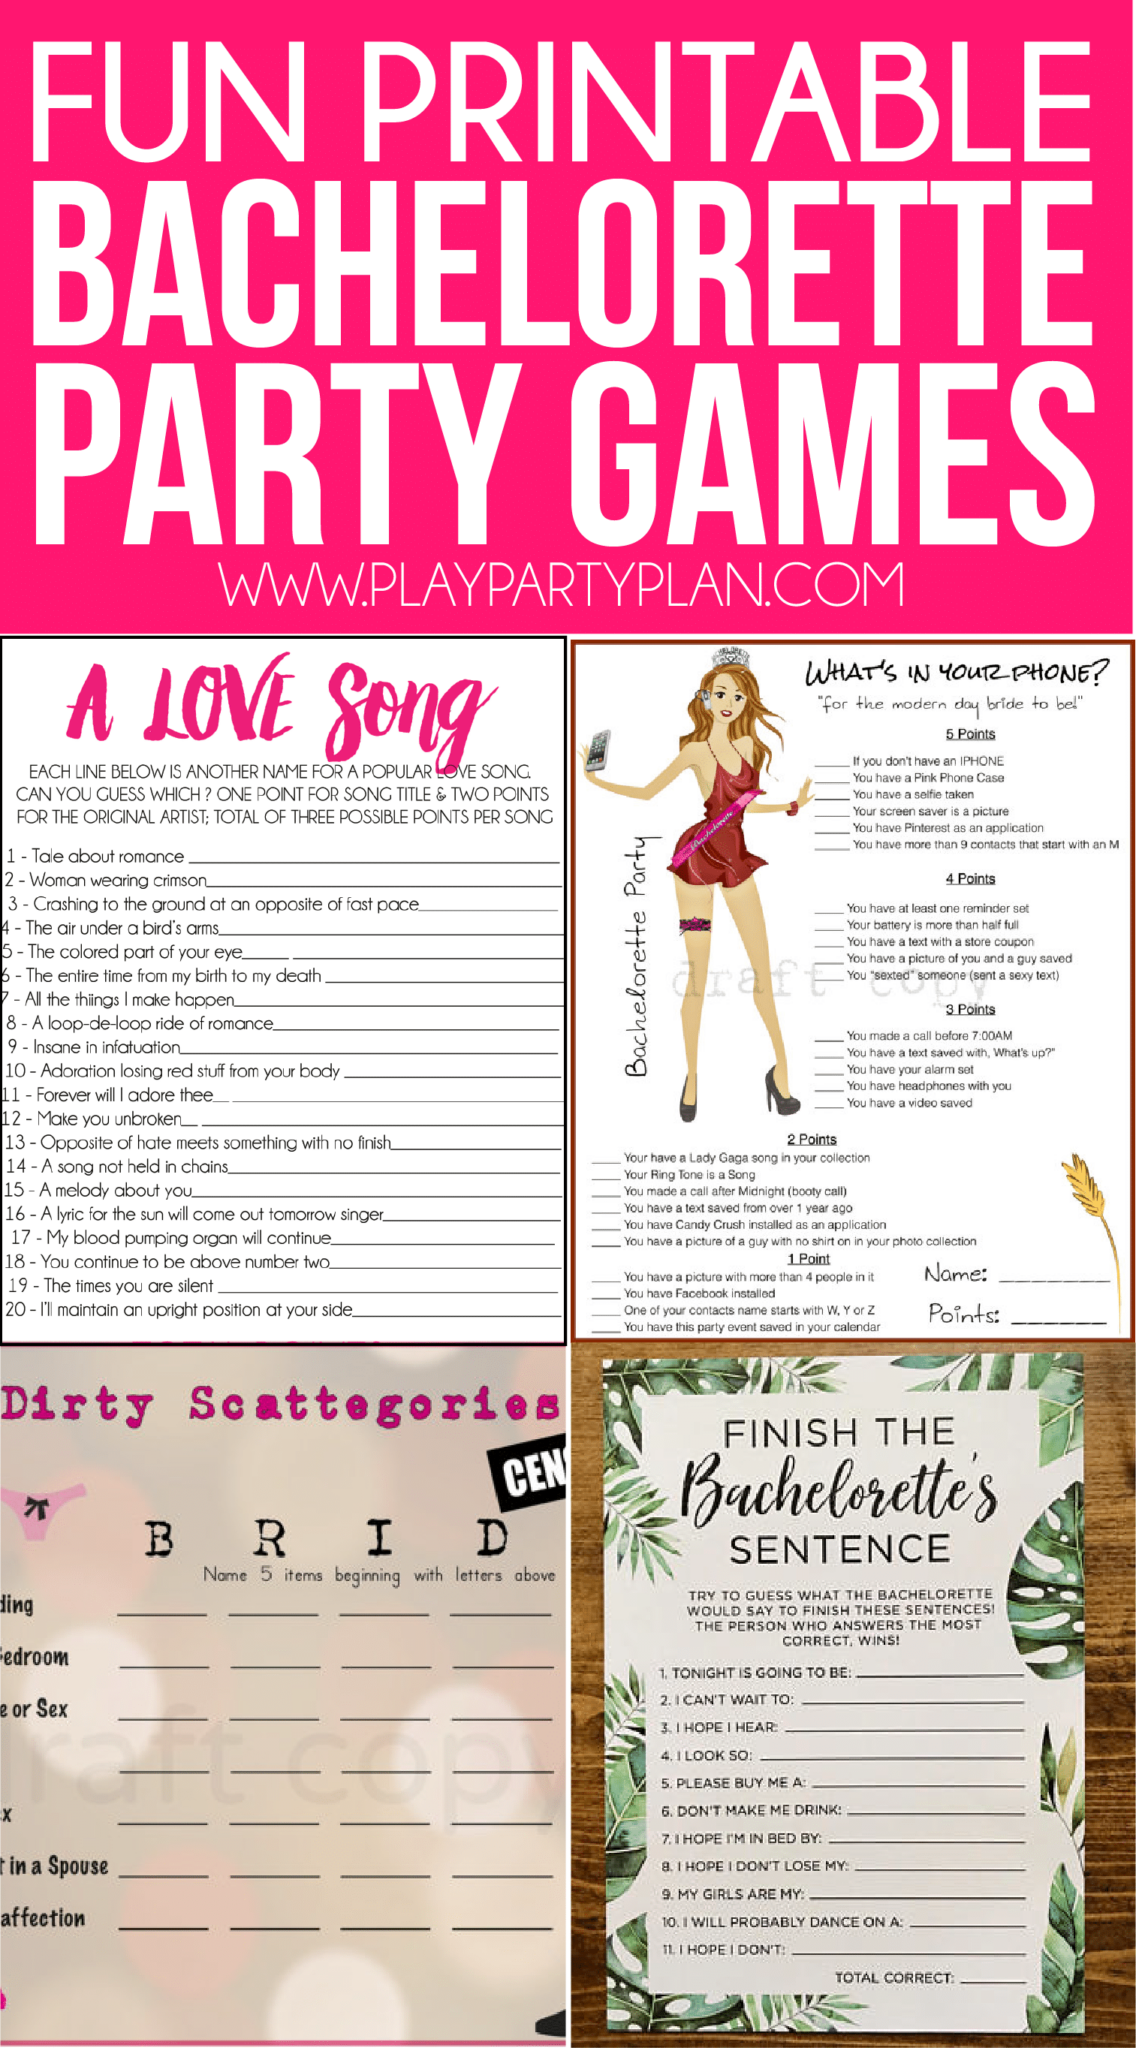 Printable Bachelorette Party Games - Customize and Print